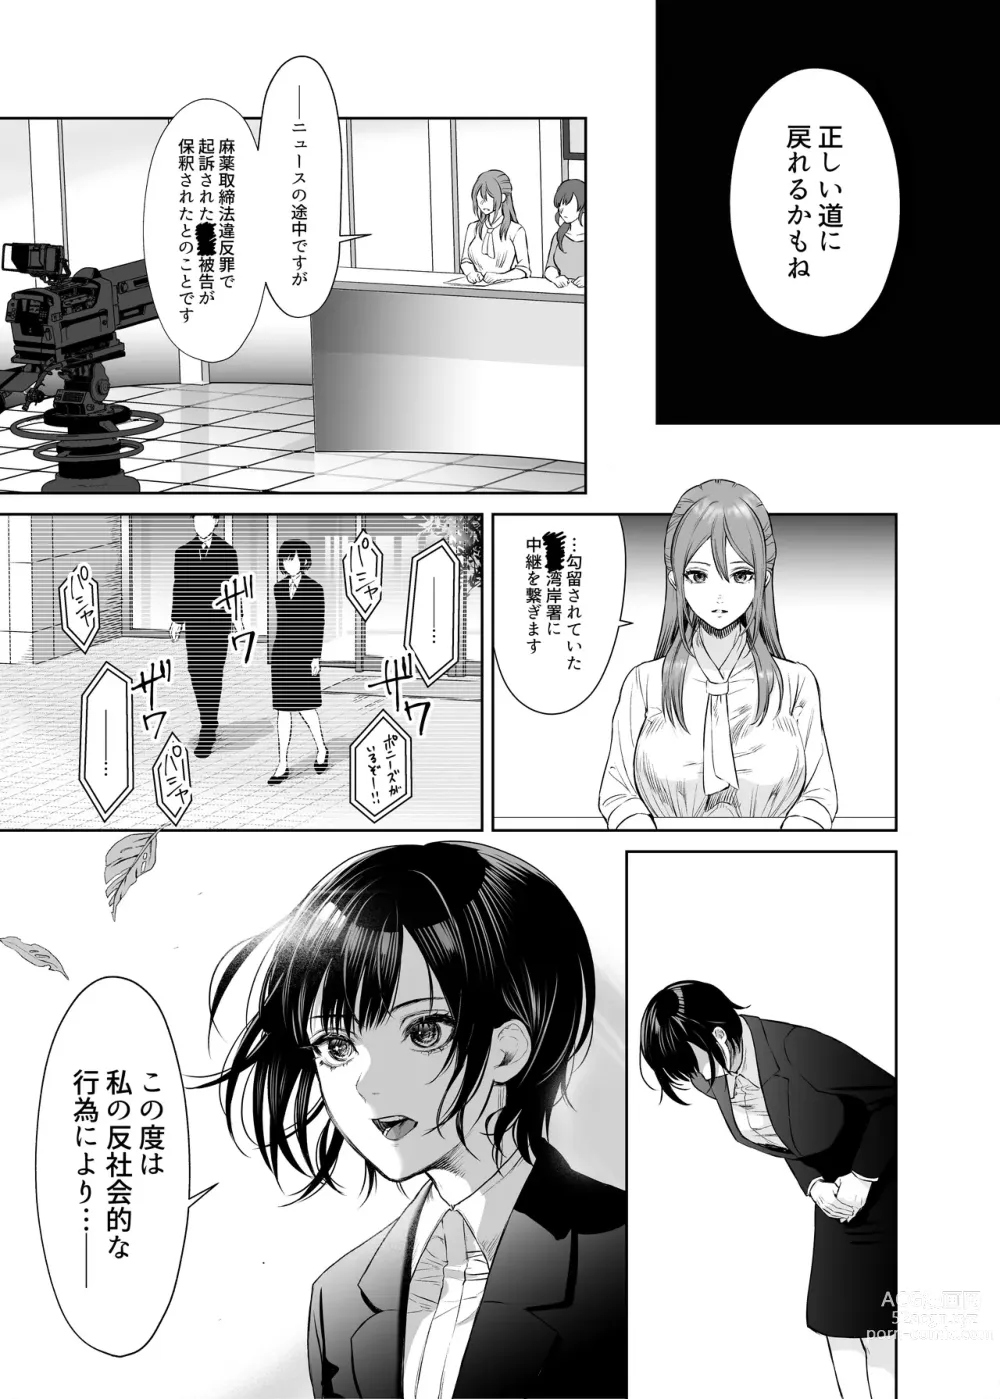 Page 29 of doujinshi LesFes Co Candid Reporting Vol. 004